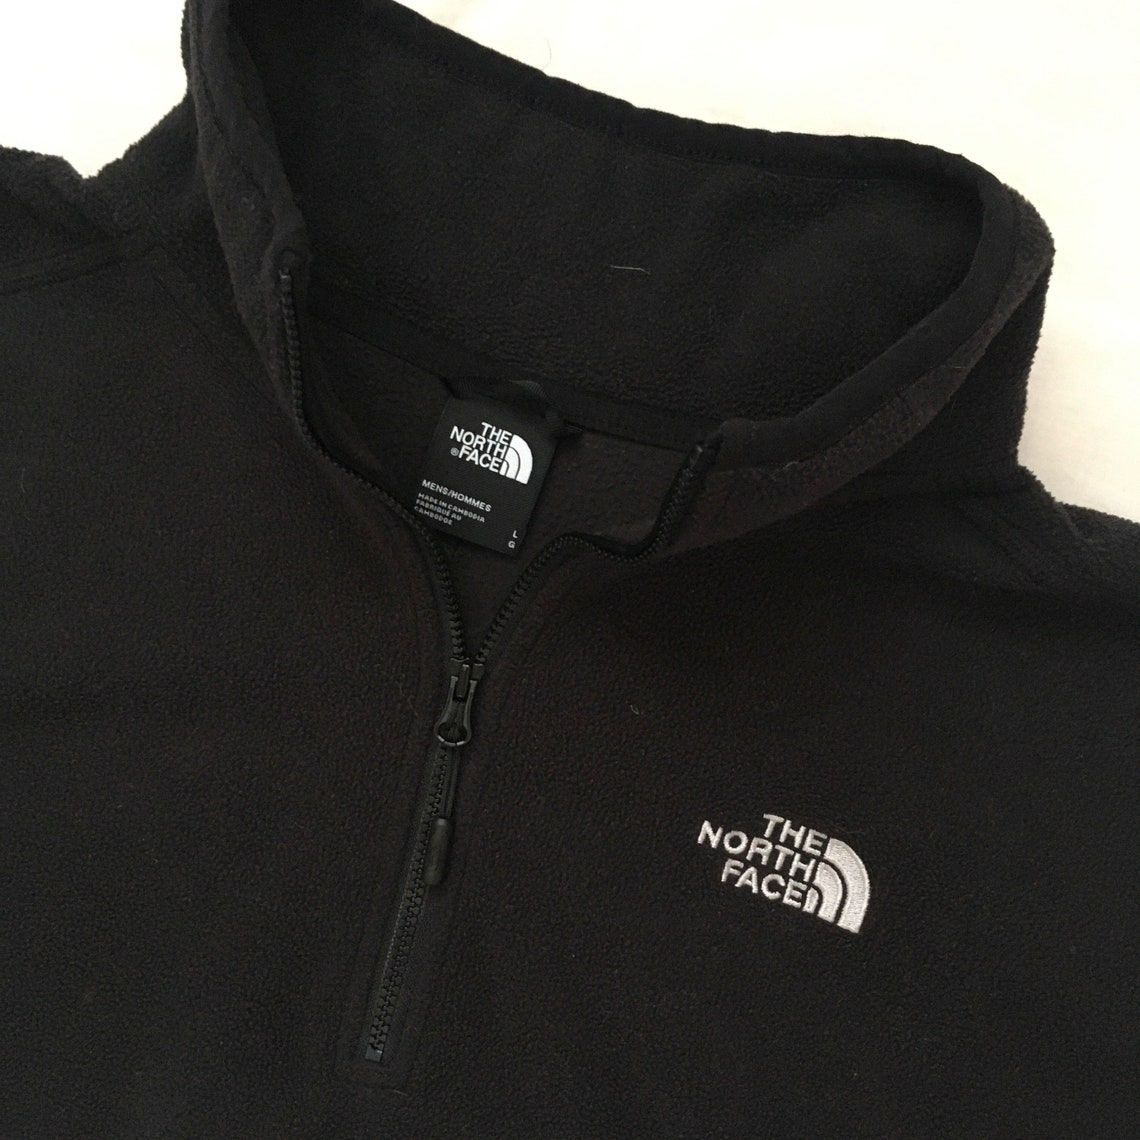 Mens black THE NORTH FACE fleece jumper sweater top size L | Etsy